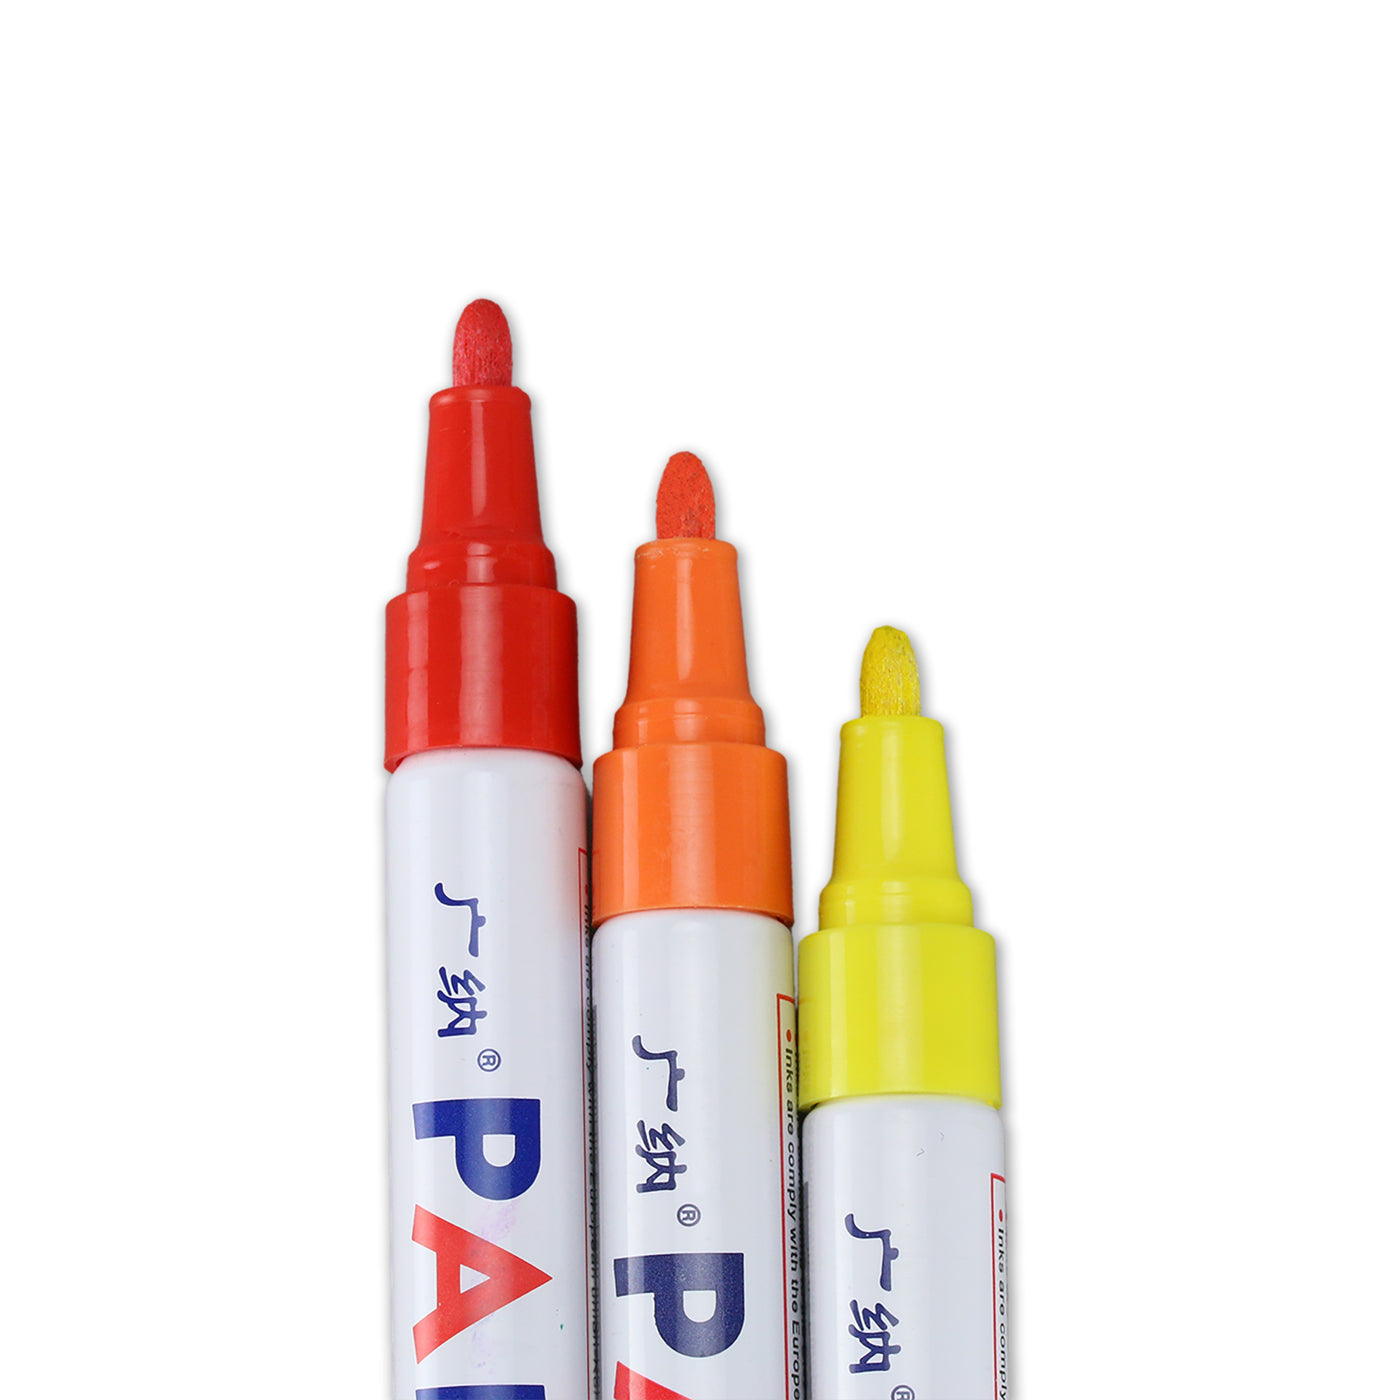 REVIEW Sharpie White Paint Pen  How to draw a Grid with Oil Paint